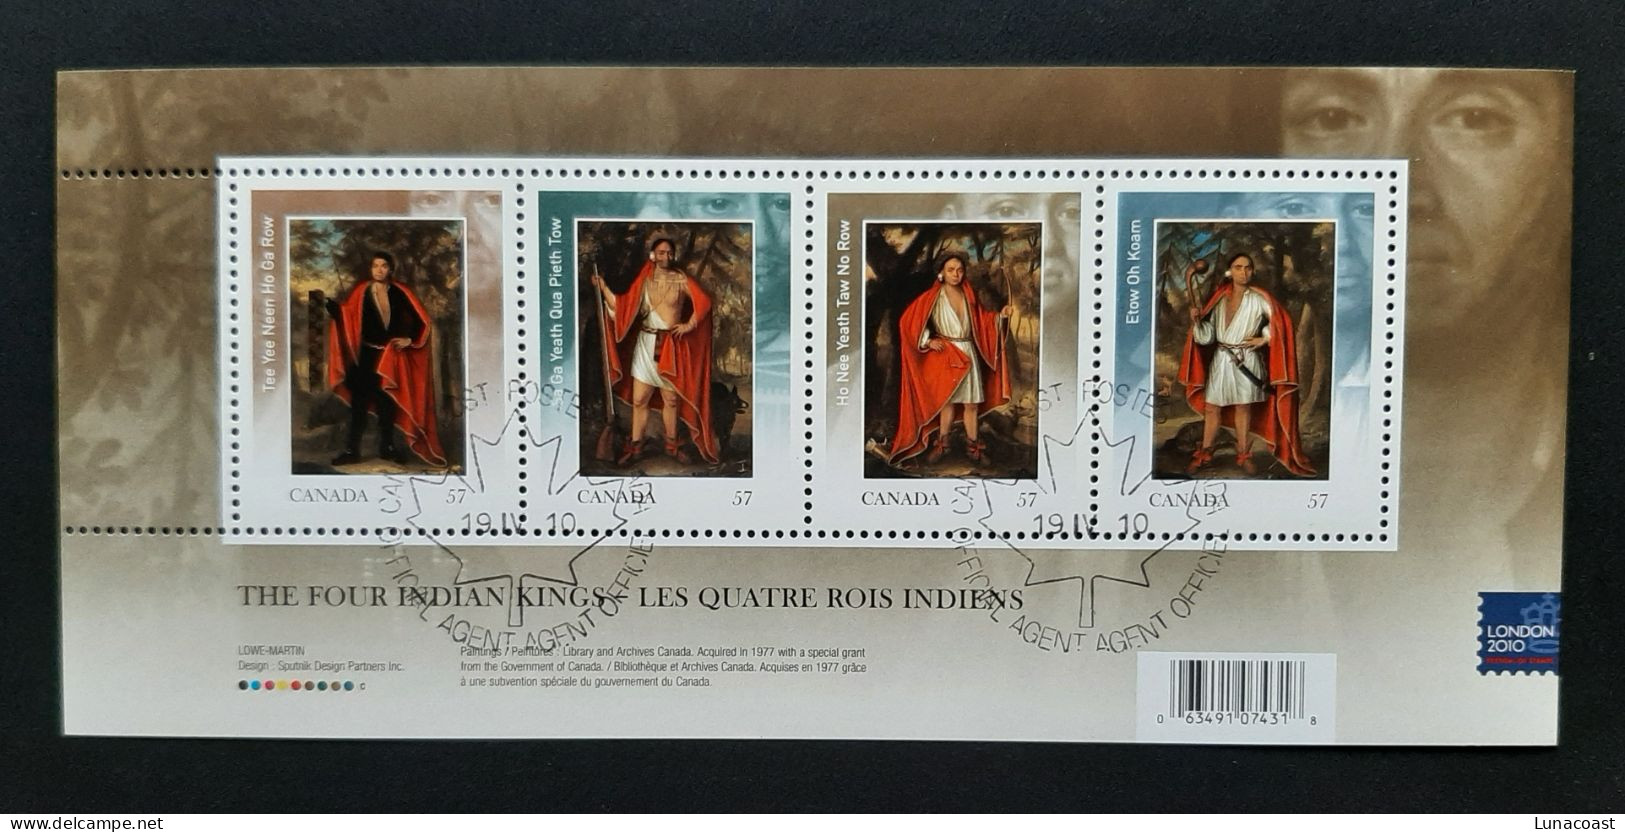 Canada 2010  USED Sc 2383c   2.28$  Souvenir Sheet, OVERPRINT, Indian Kings - Used Stamps